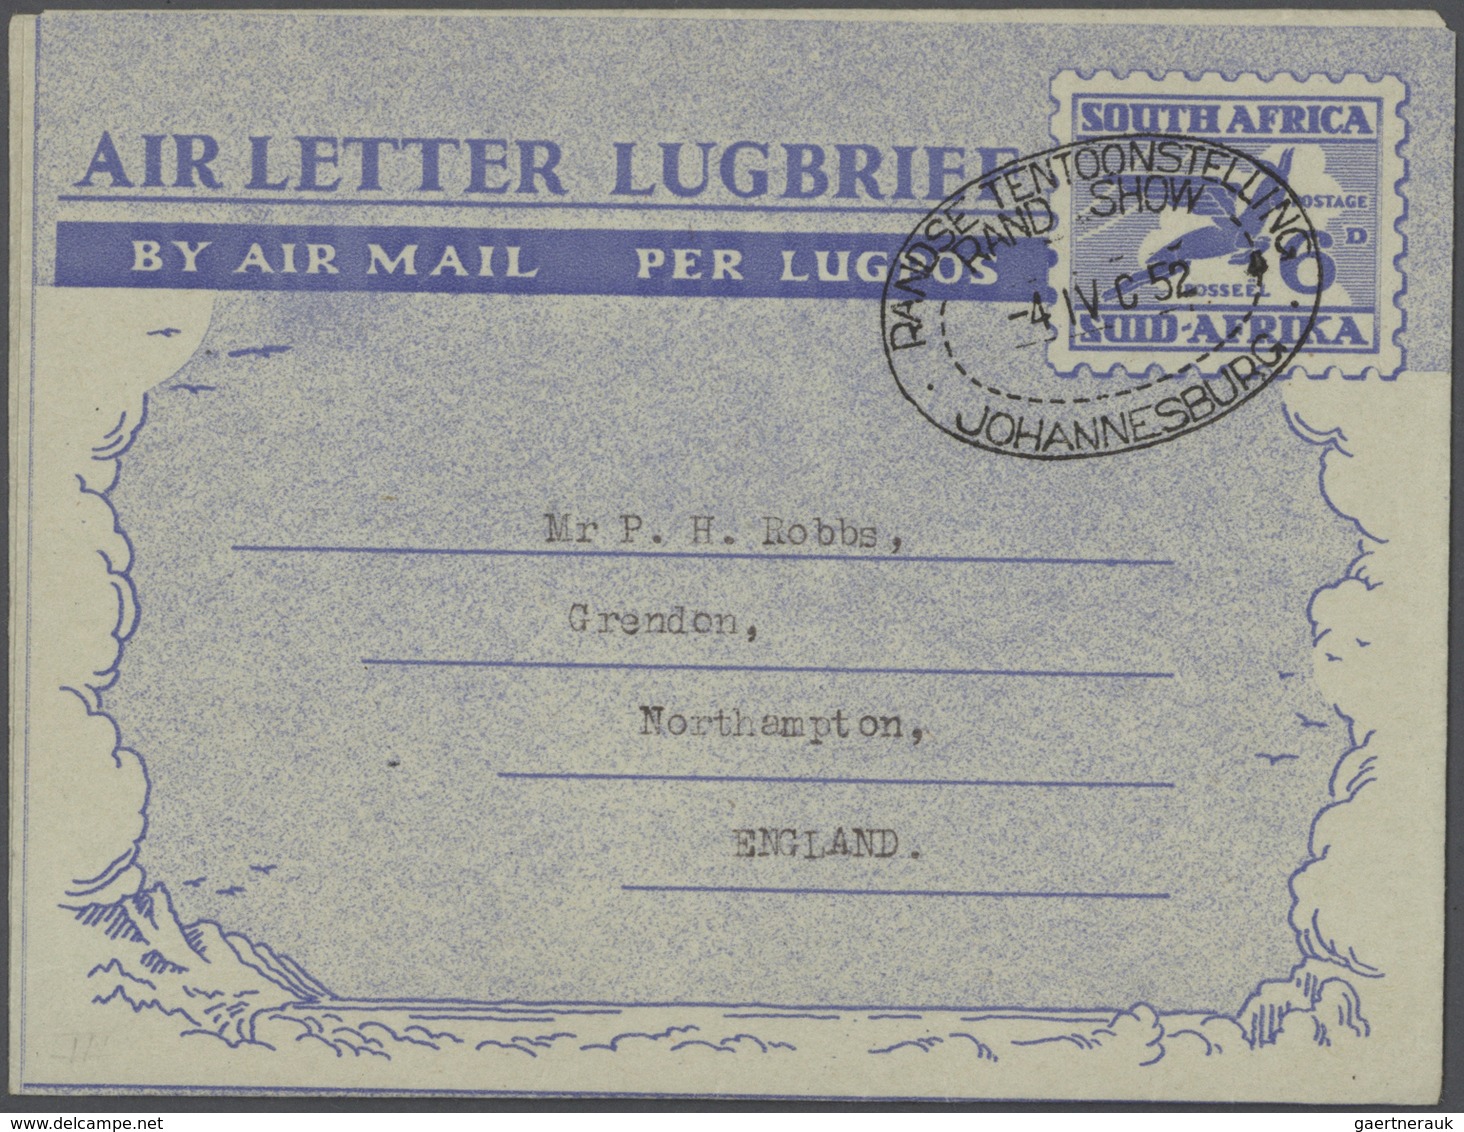 Südafrika: 1945/80 (ca.), AEROGRAMMES: duplicated accumulation of about 280 airletters, lettercards